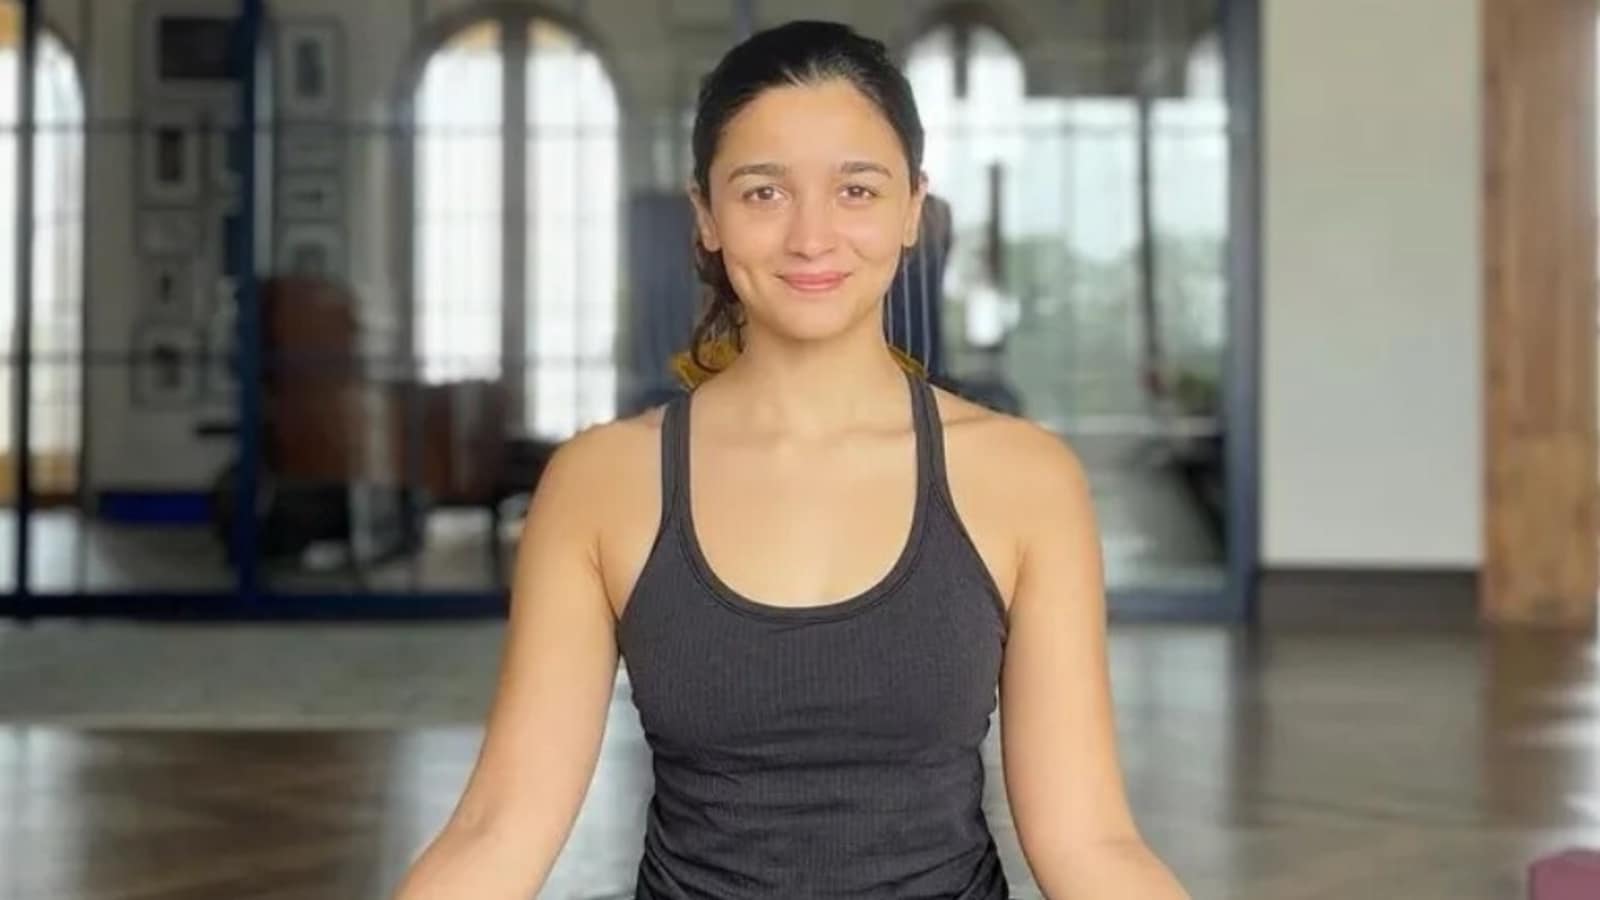 Alia Bhatt’s trainer suggests tips and yoga breathing technique to beat the heat | Health